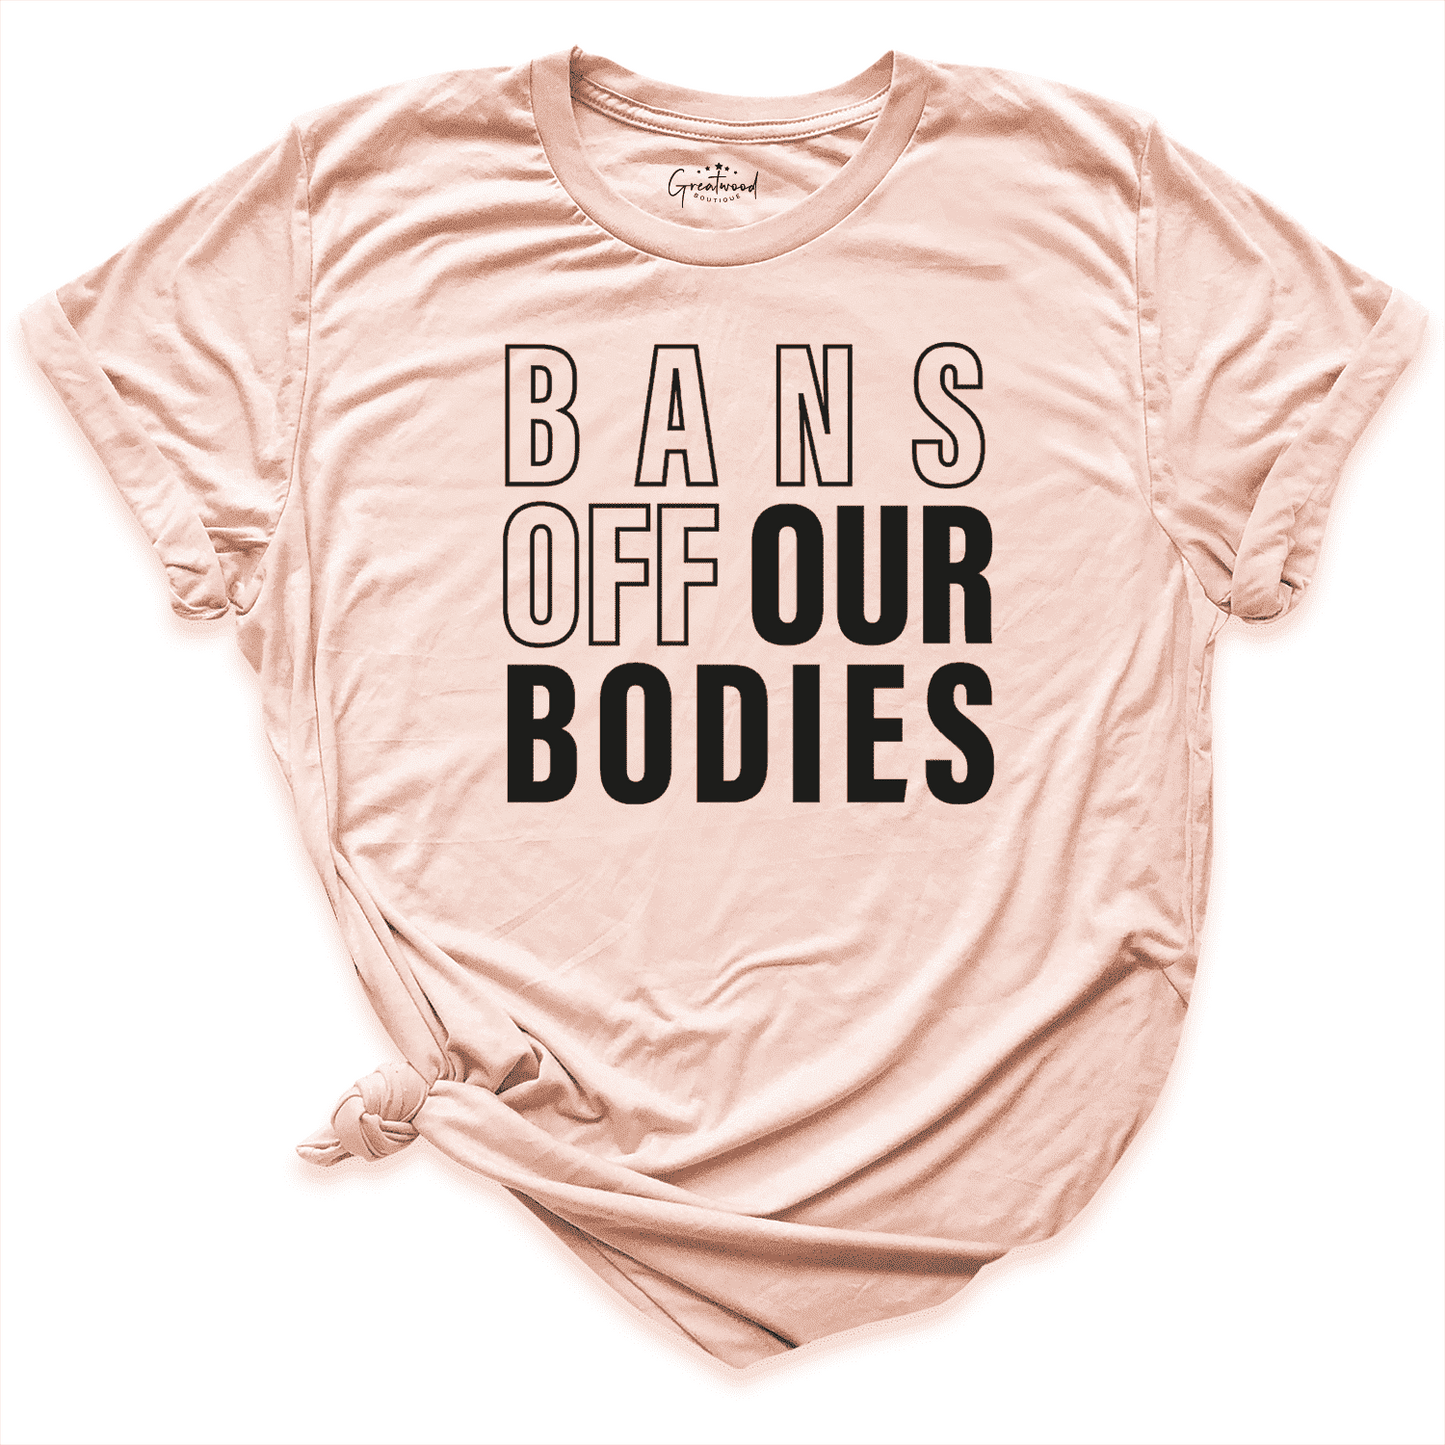 Bans Off Our Bodies Shirt Peach - Greatwood Boutique